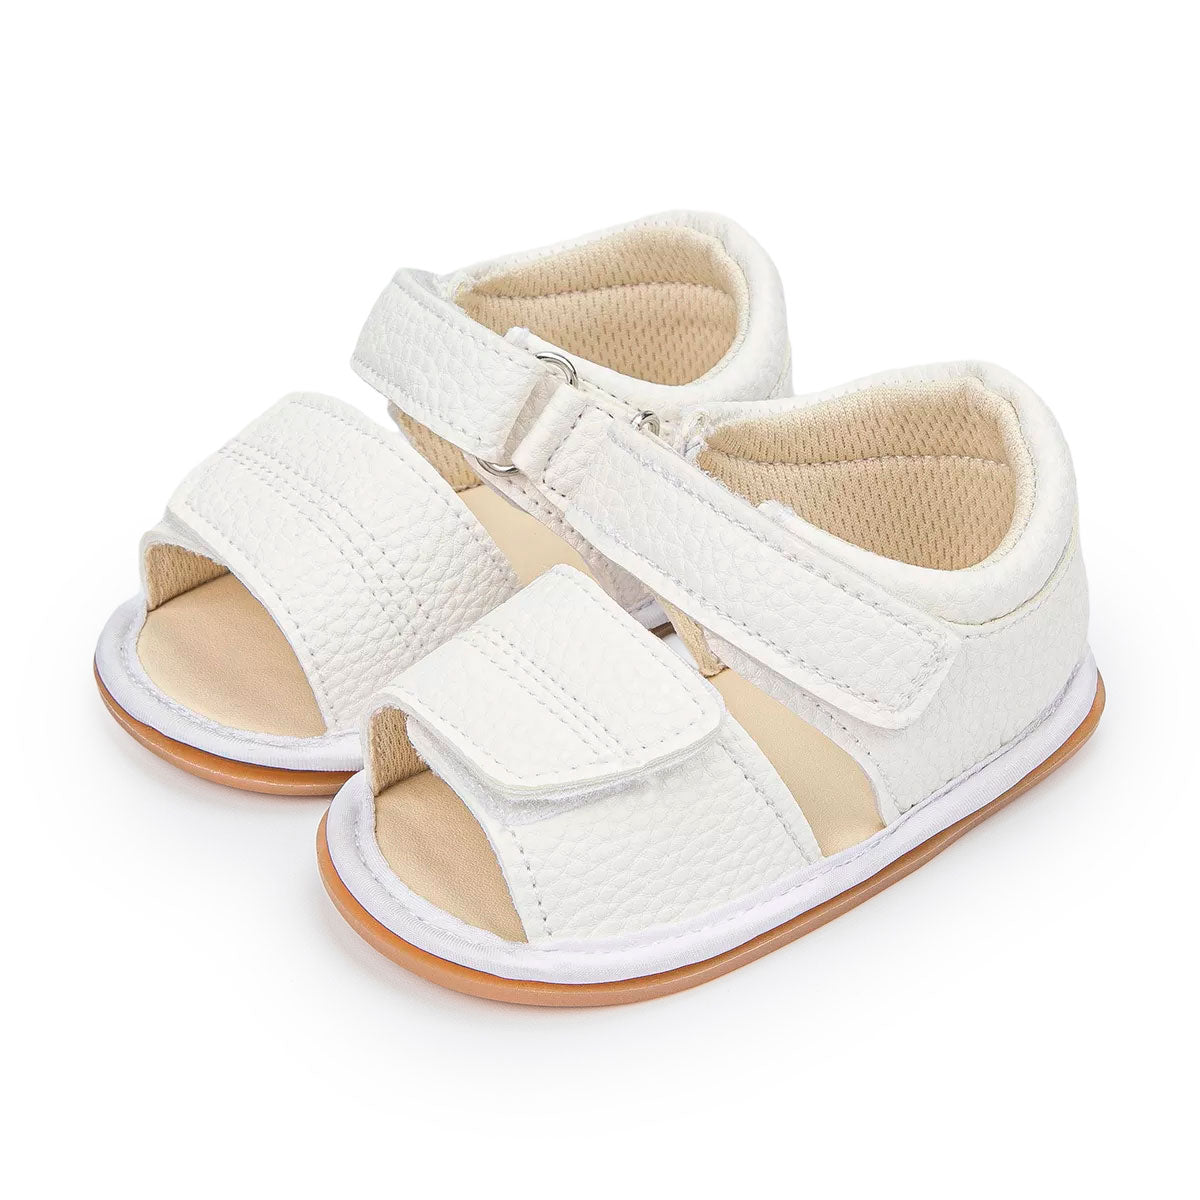 Summer Sandals Baby Girl PU Leather Shoes Baby